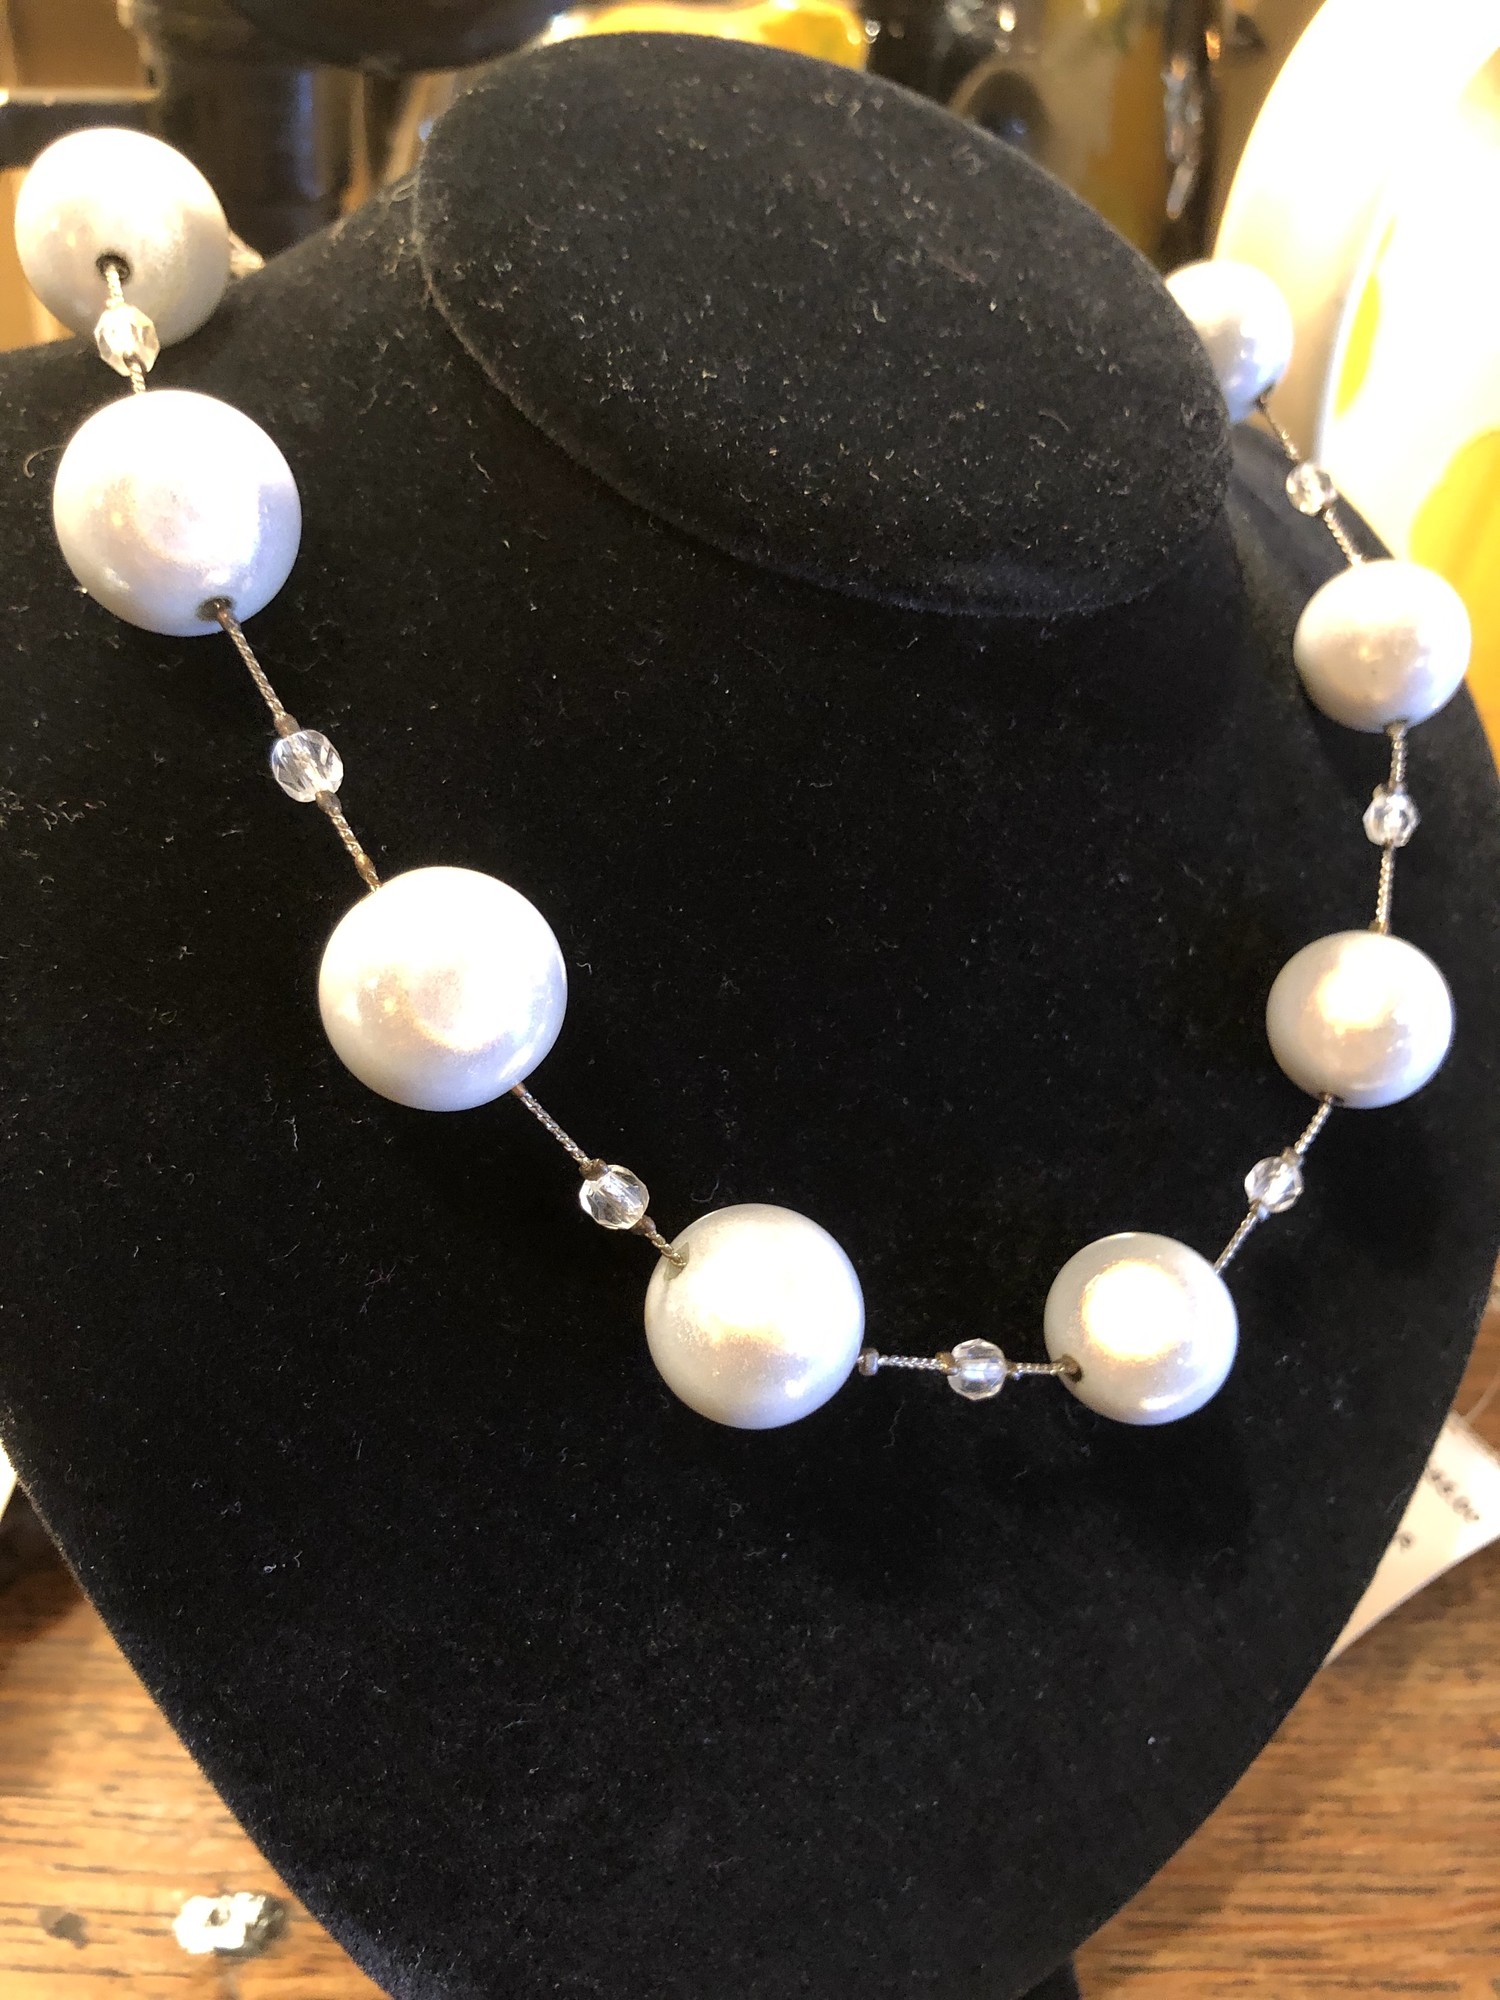 Orb Necklace. The color of this vintage piece is so unusual, White that glows!